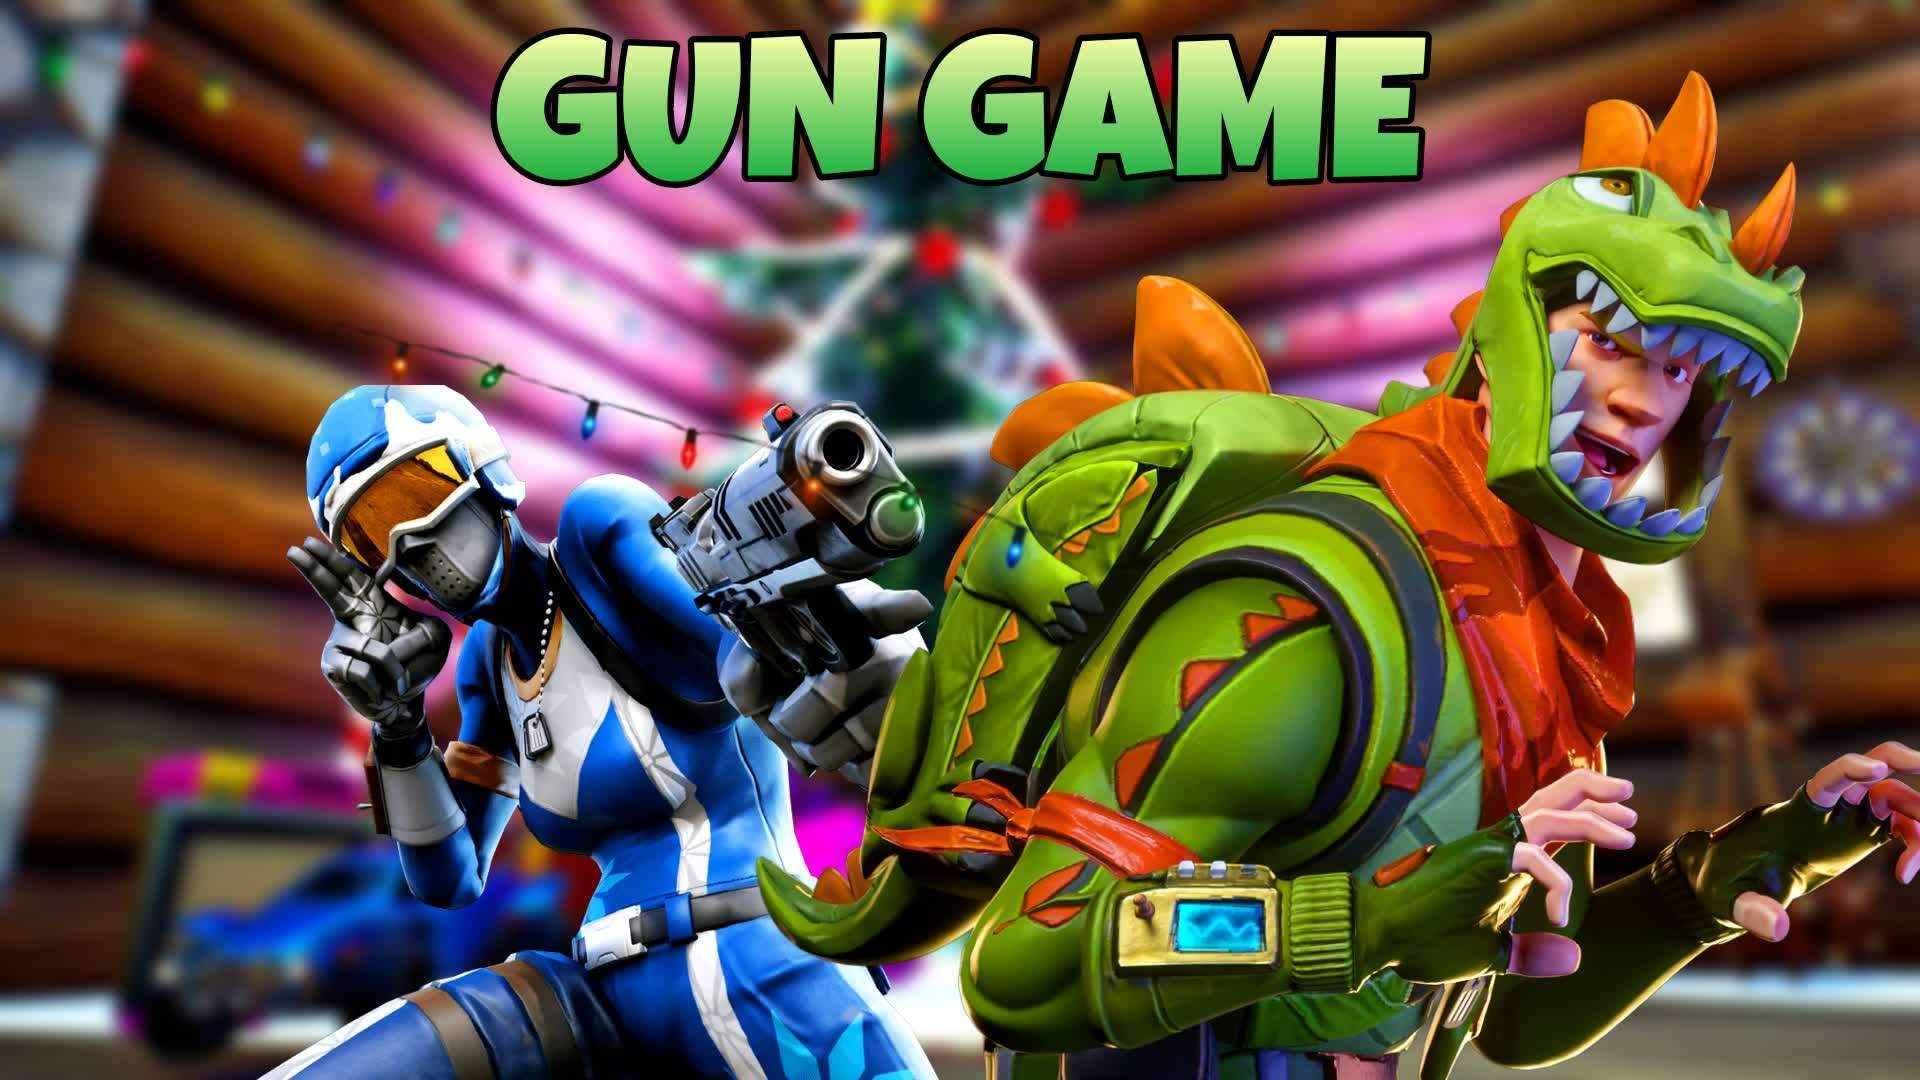 You Are A Toy! (GUN GAME)